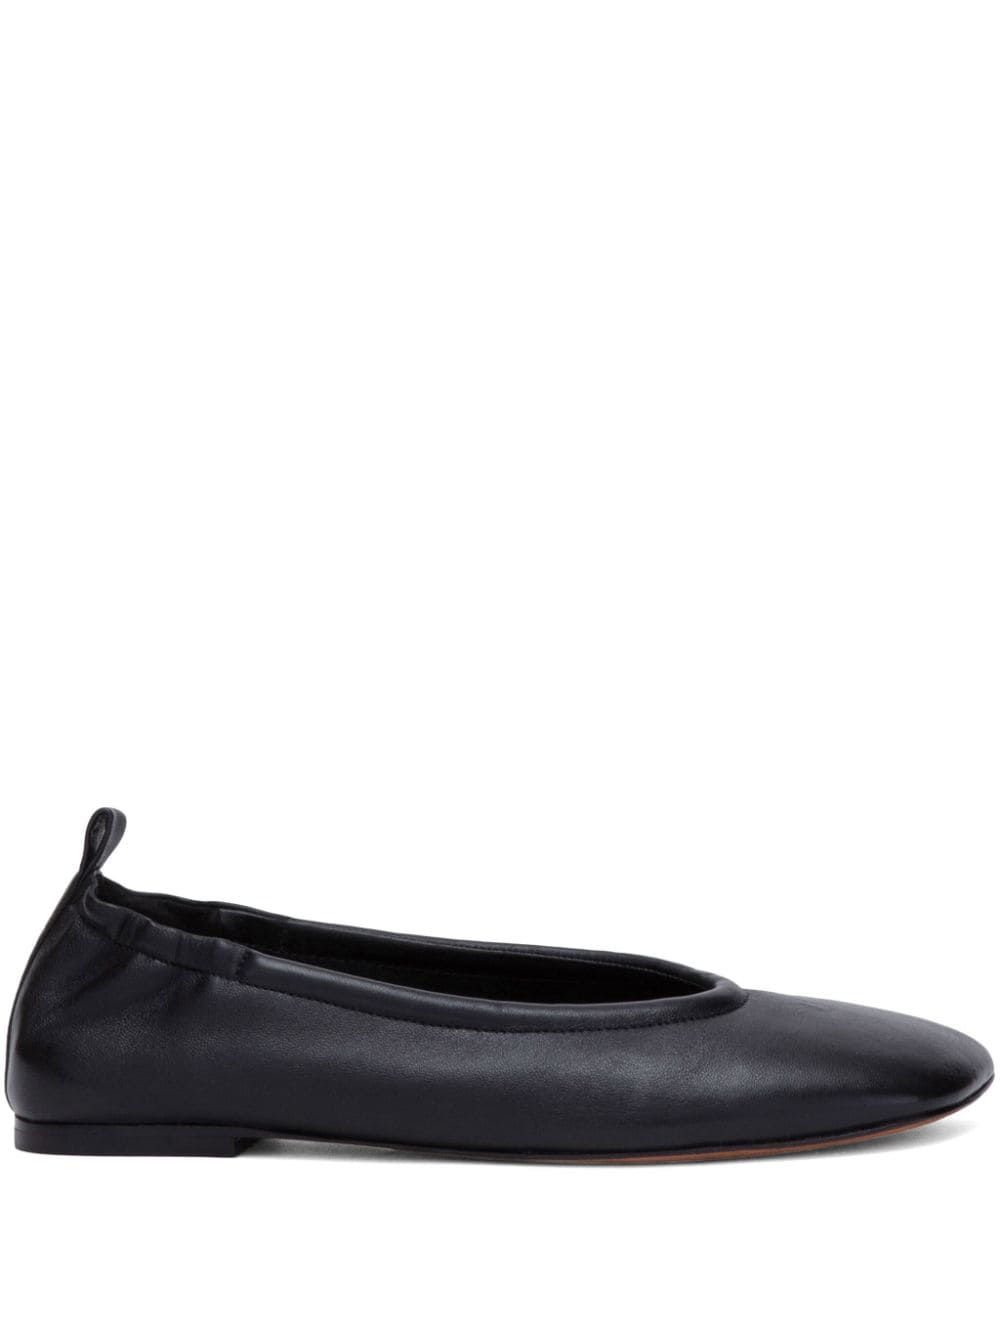 3.1 Phillip Lim / フィリップ リム Id Leather Ballerina Shoes In Black